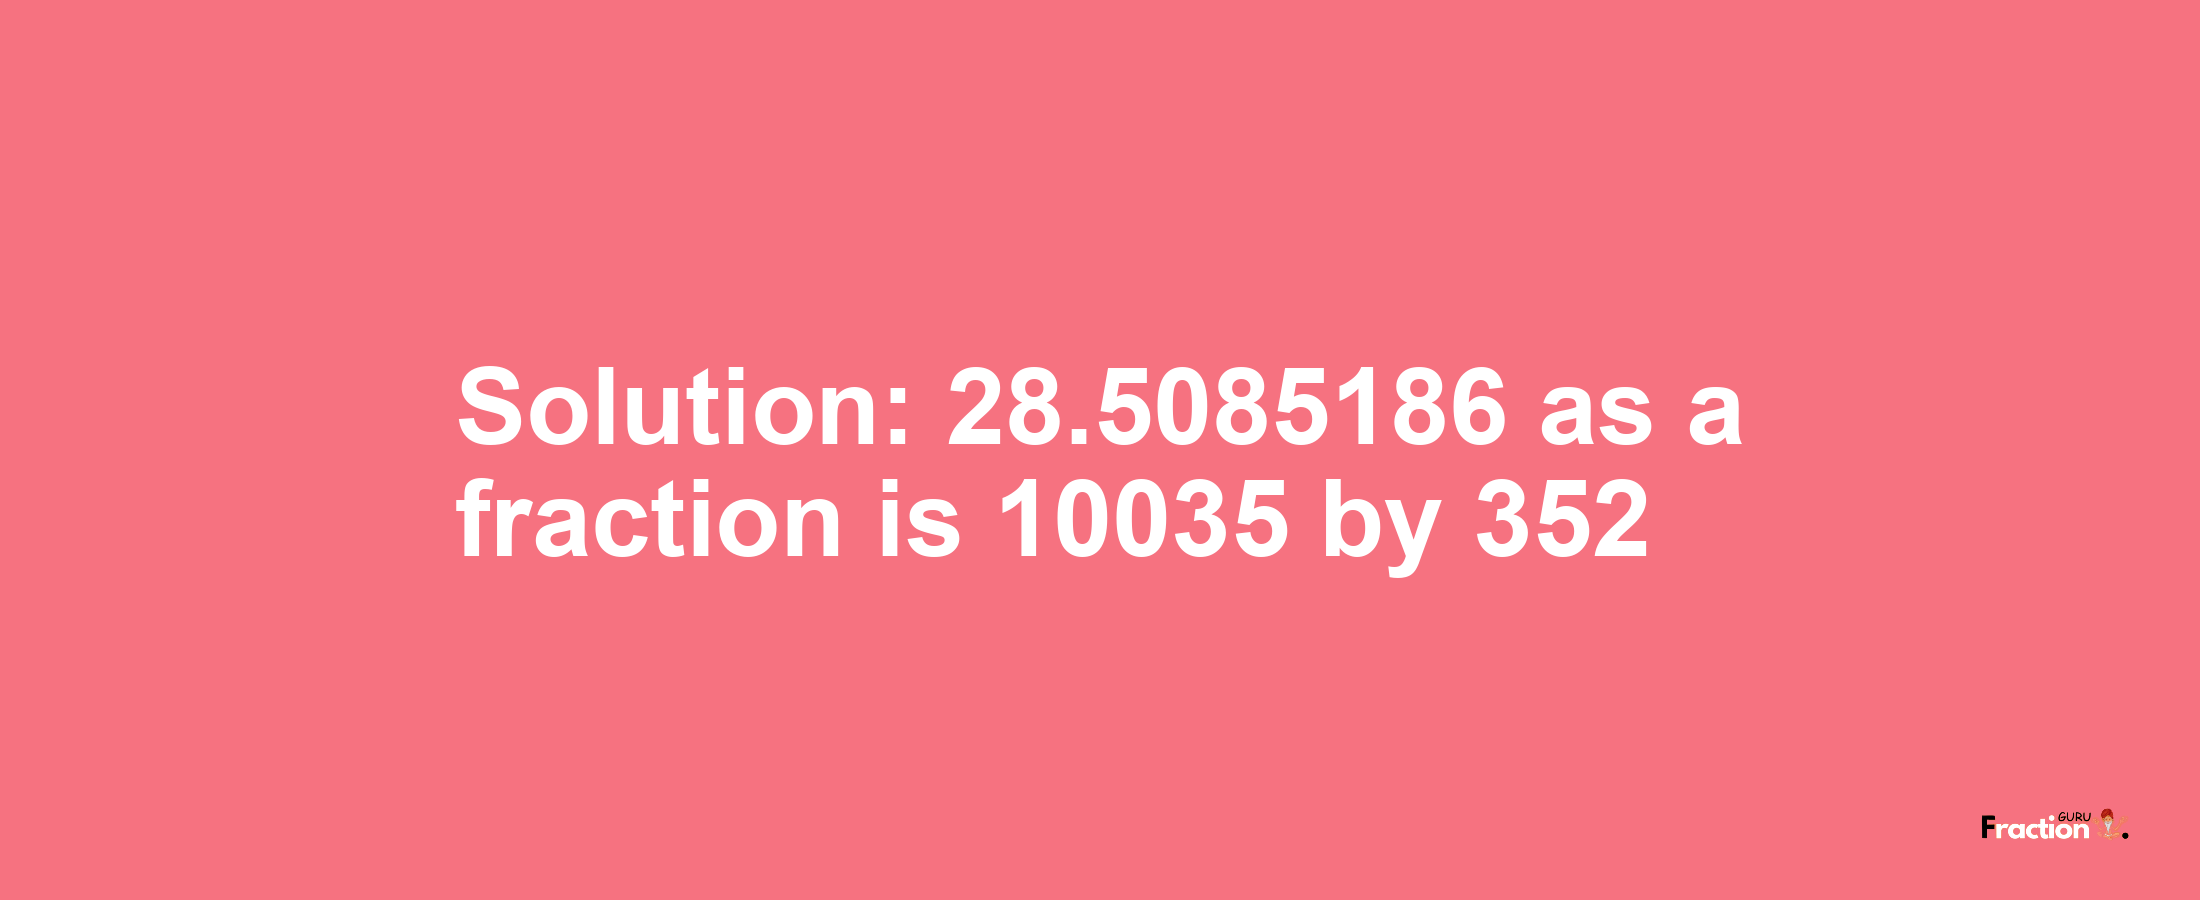 Solution:28.5085186 as a fraction is 10035/352